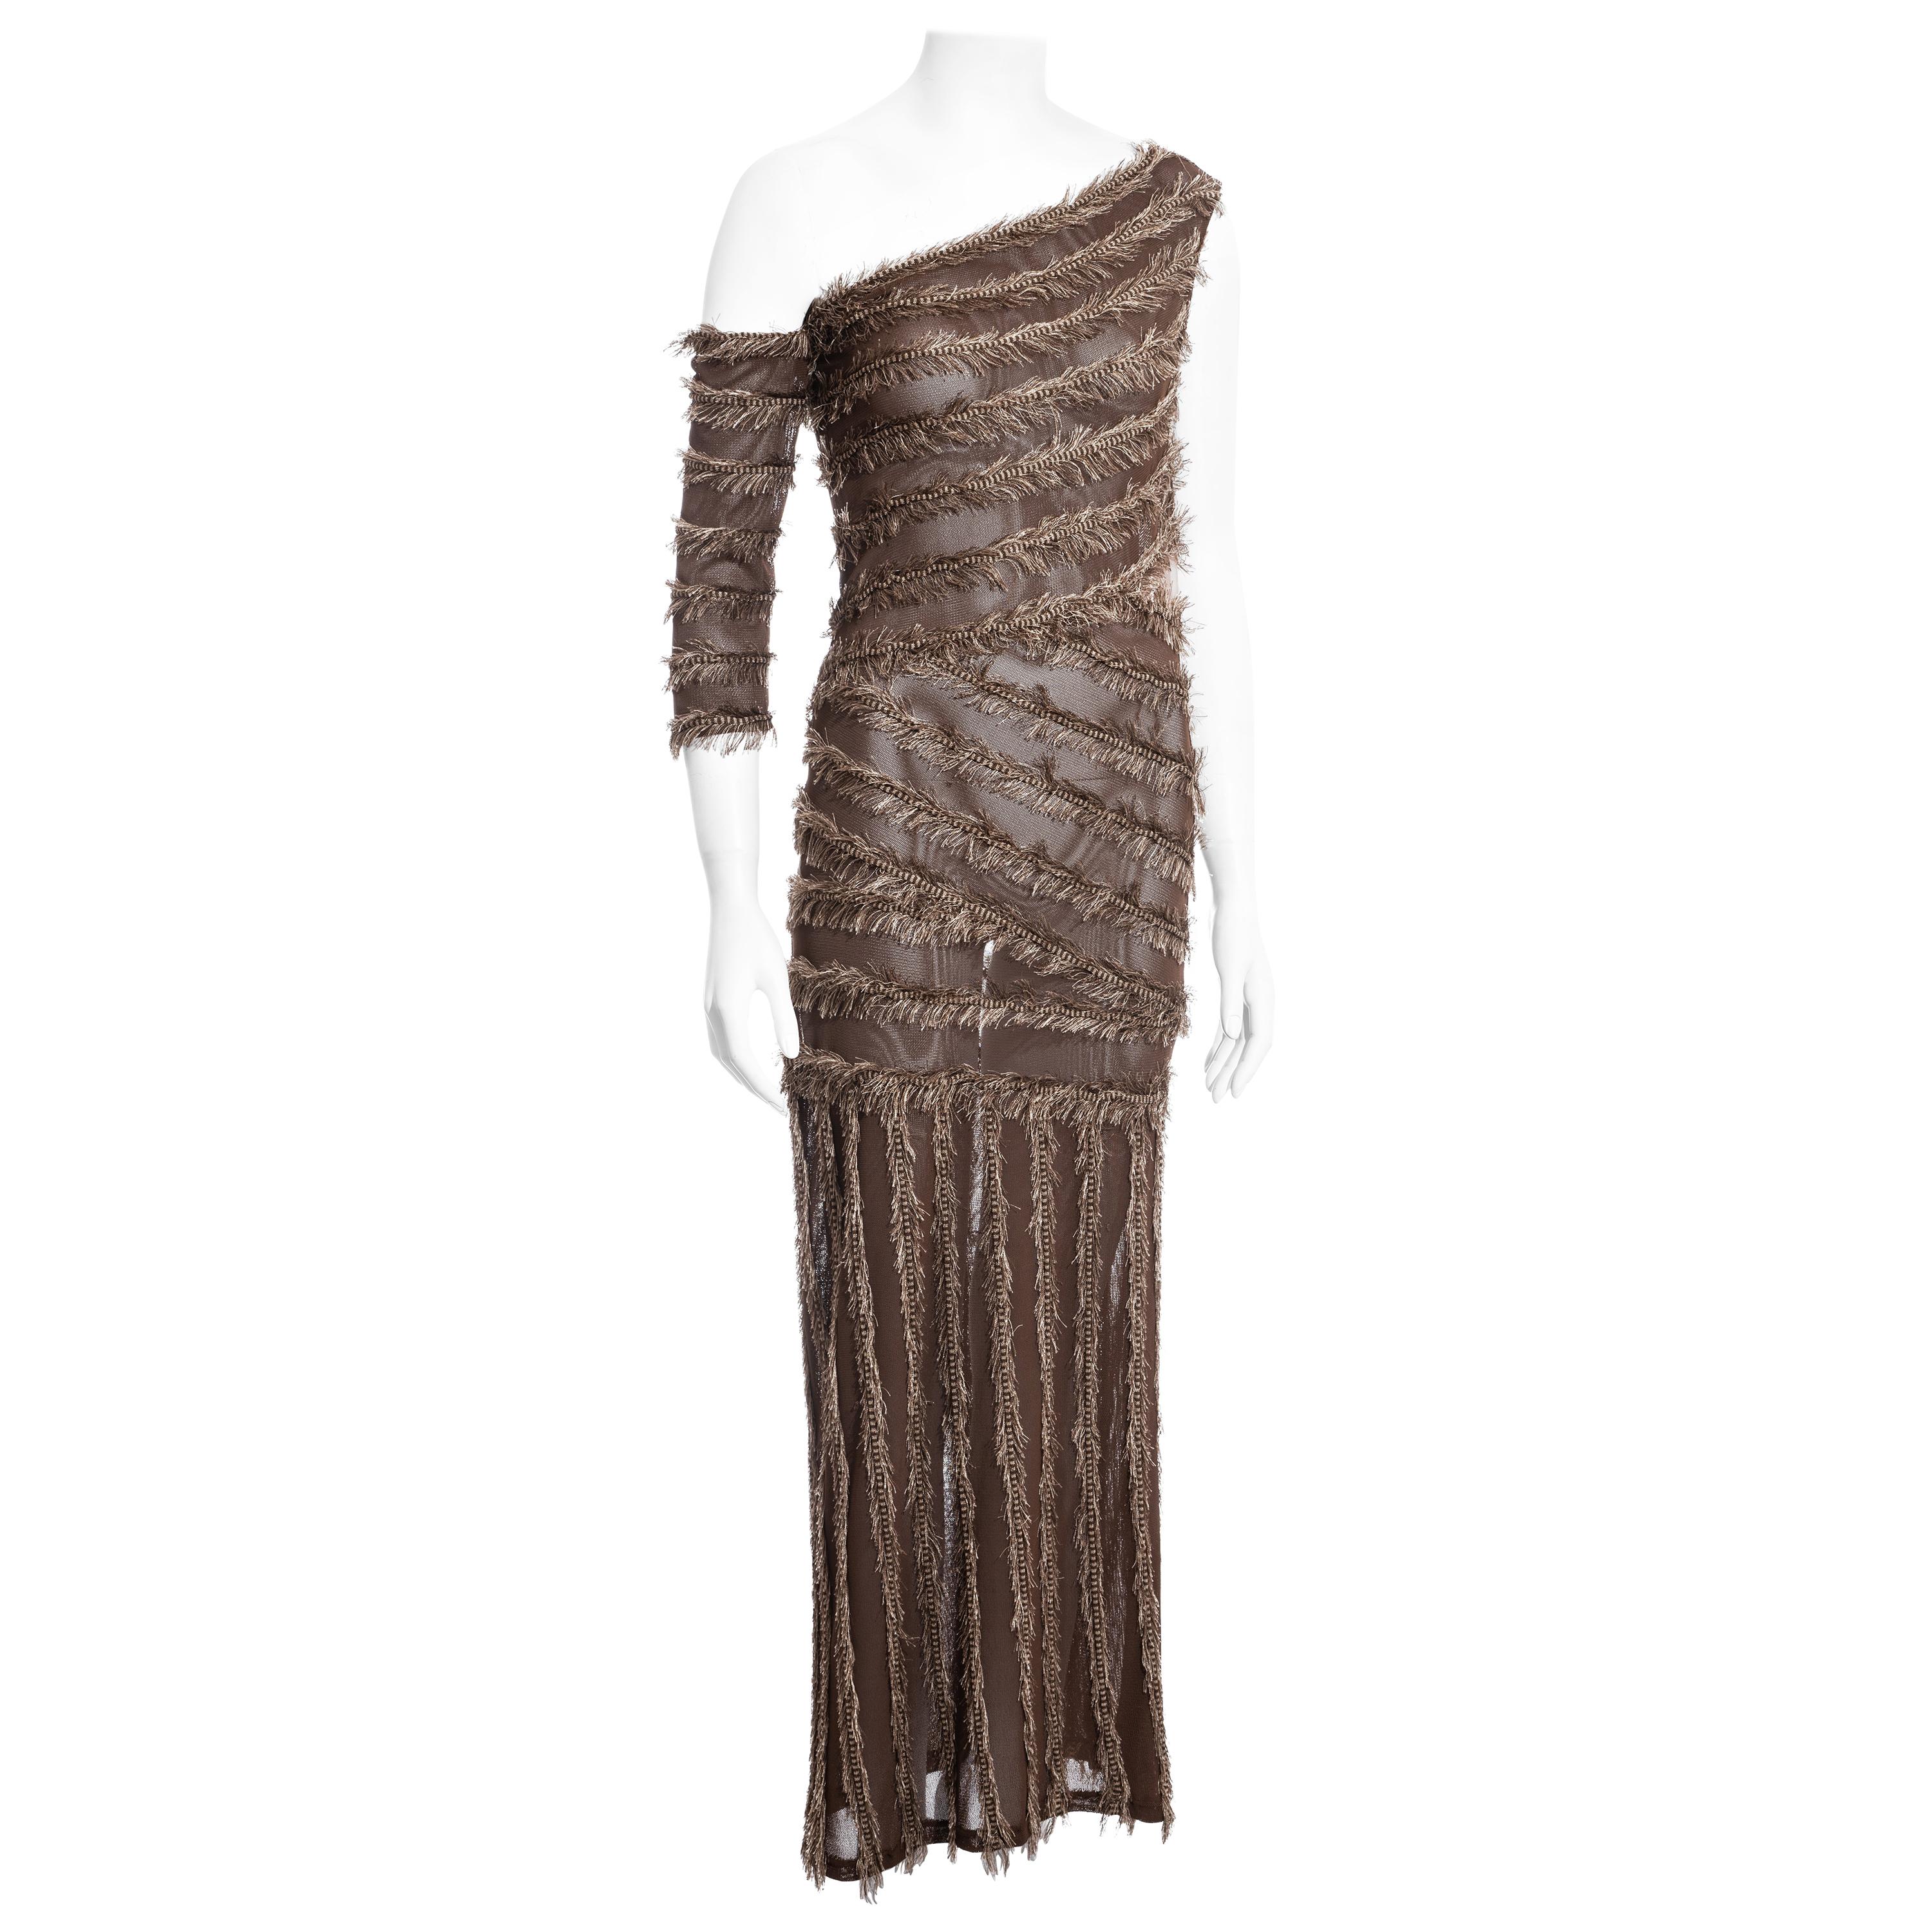 Gianfranco Ferre brown viscose knit one-sleeve dress, c. 1990s For Sale